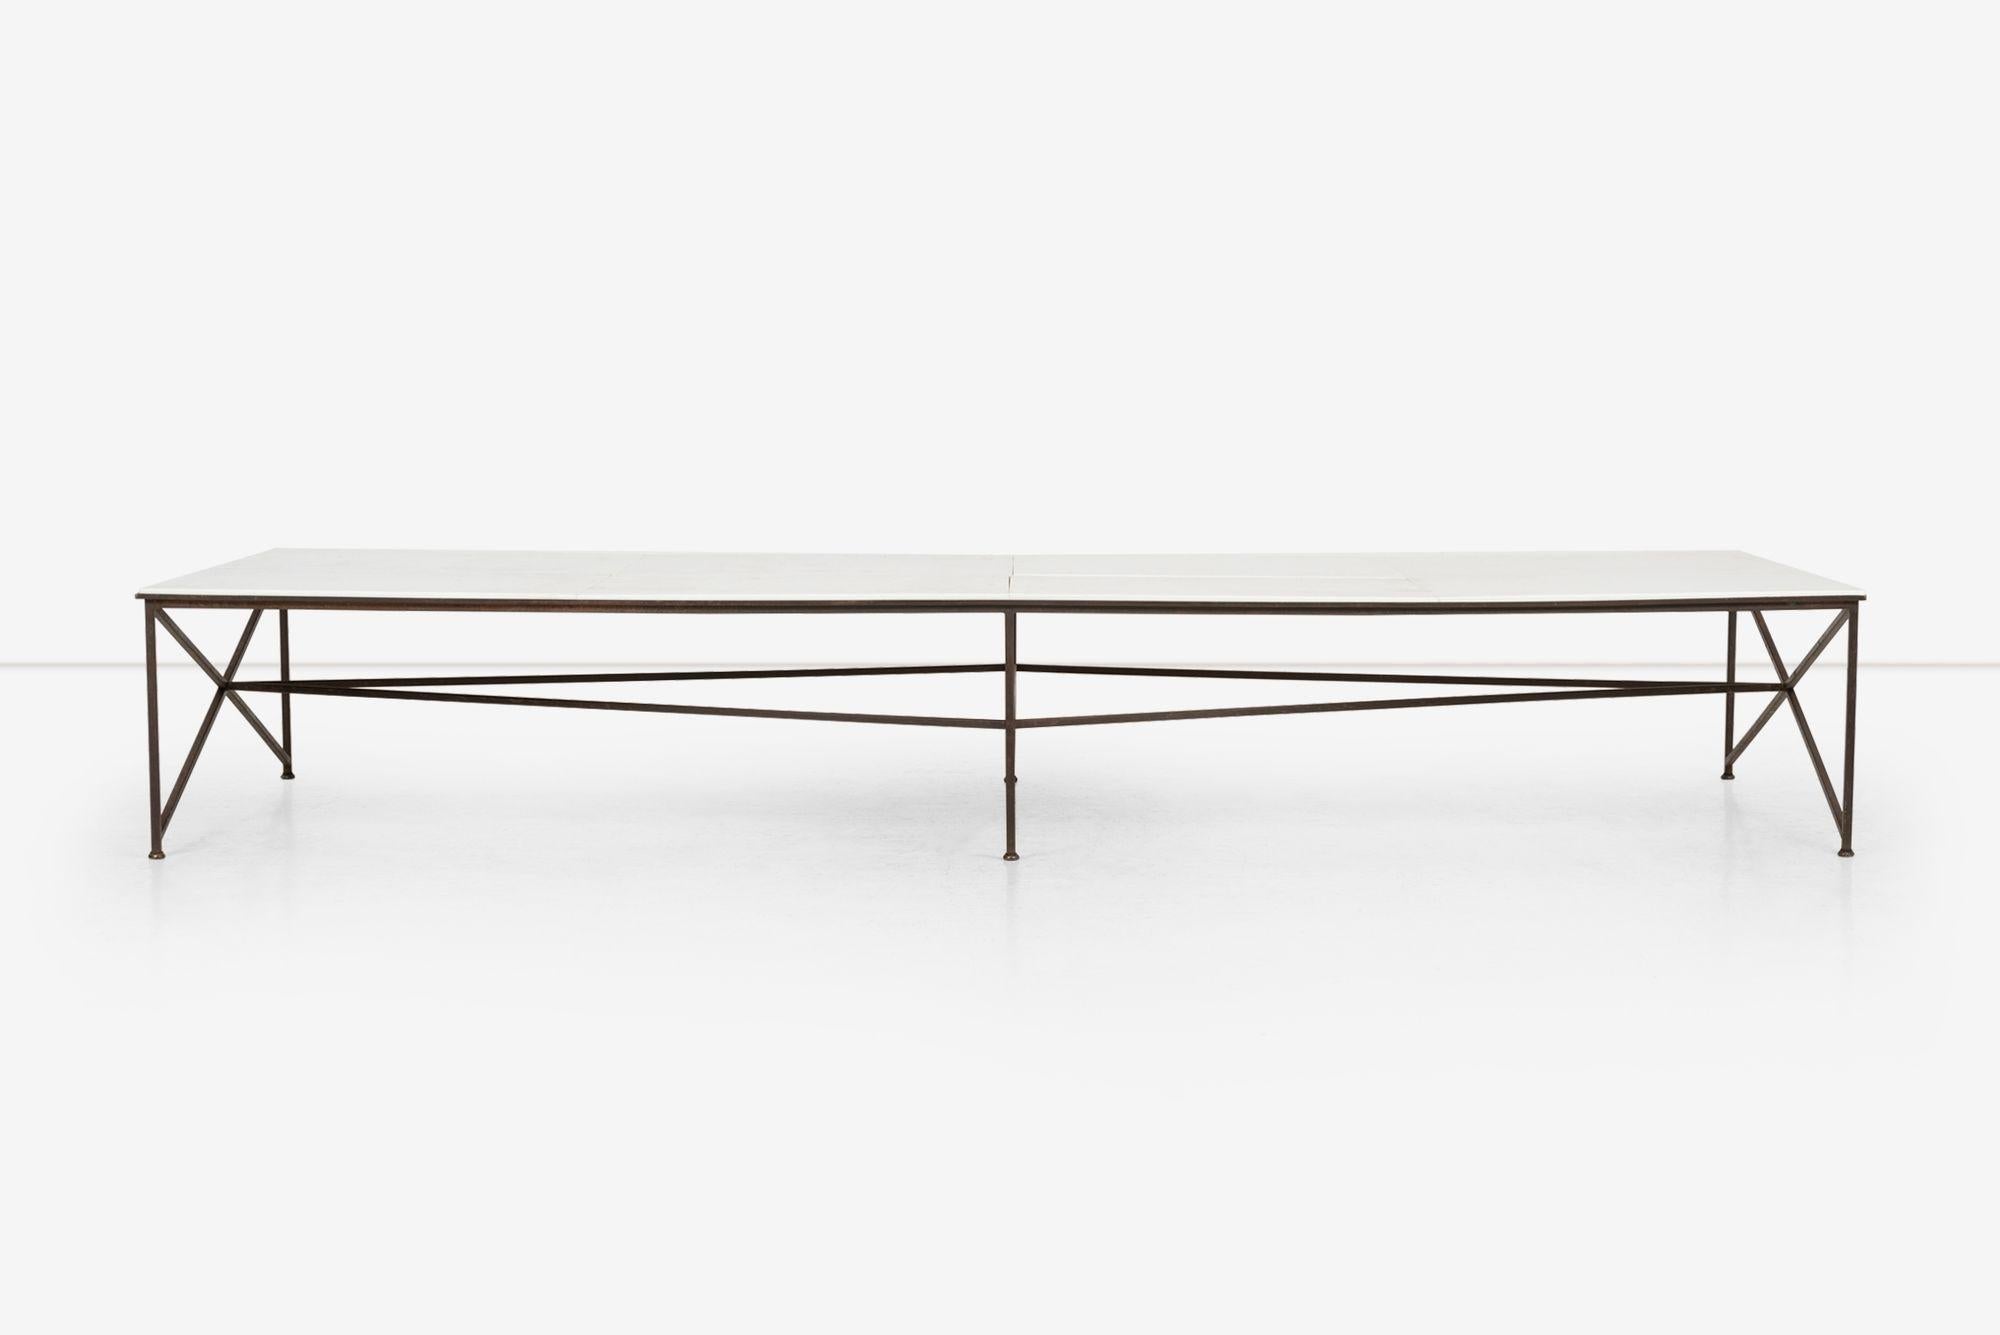 Paul McCobb Irwin Collection Monumental Display Table, model C8707 Calvin USA, 1952
Crafted with eight equal rectangular 1/4